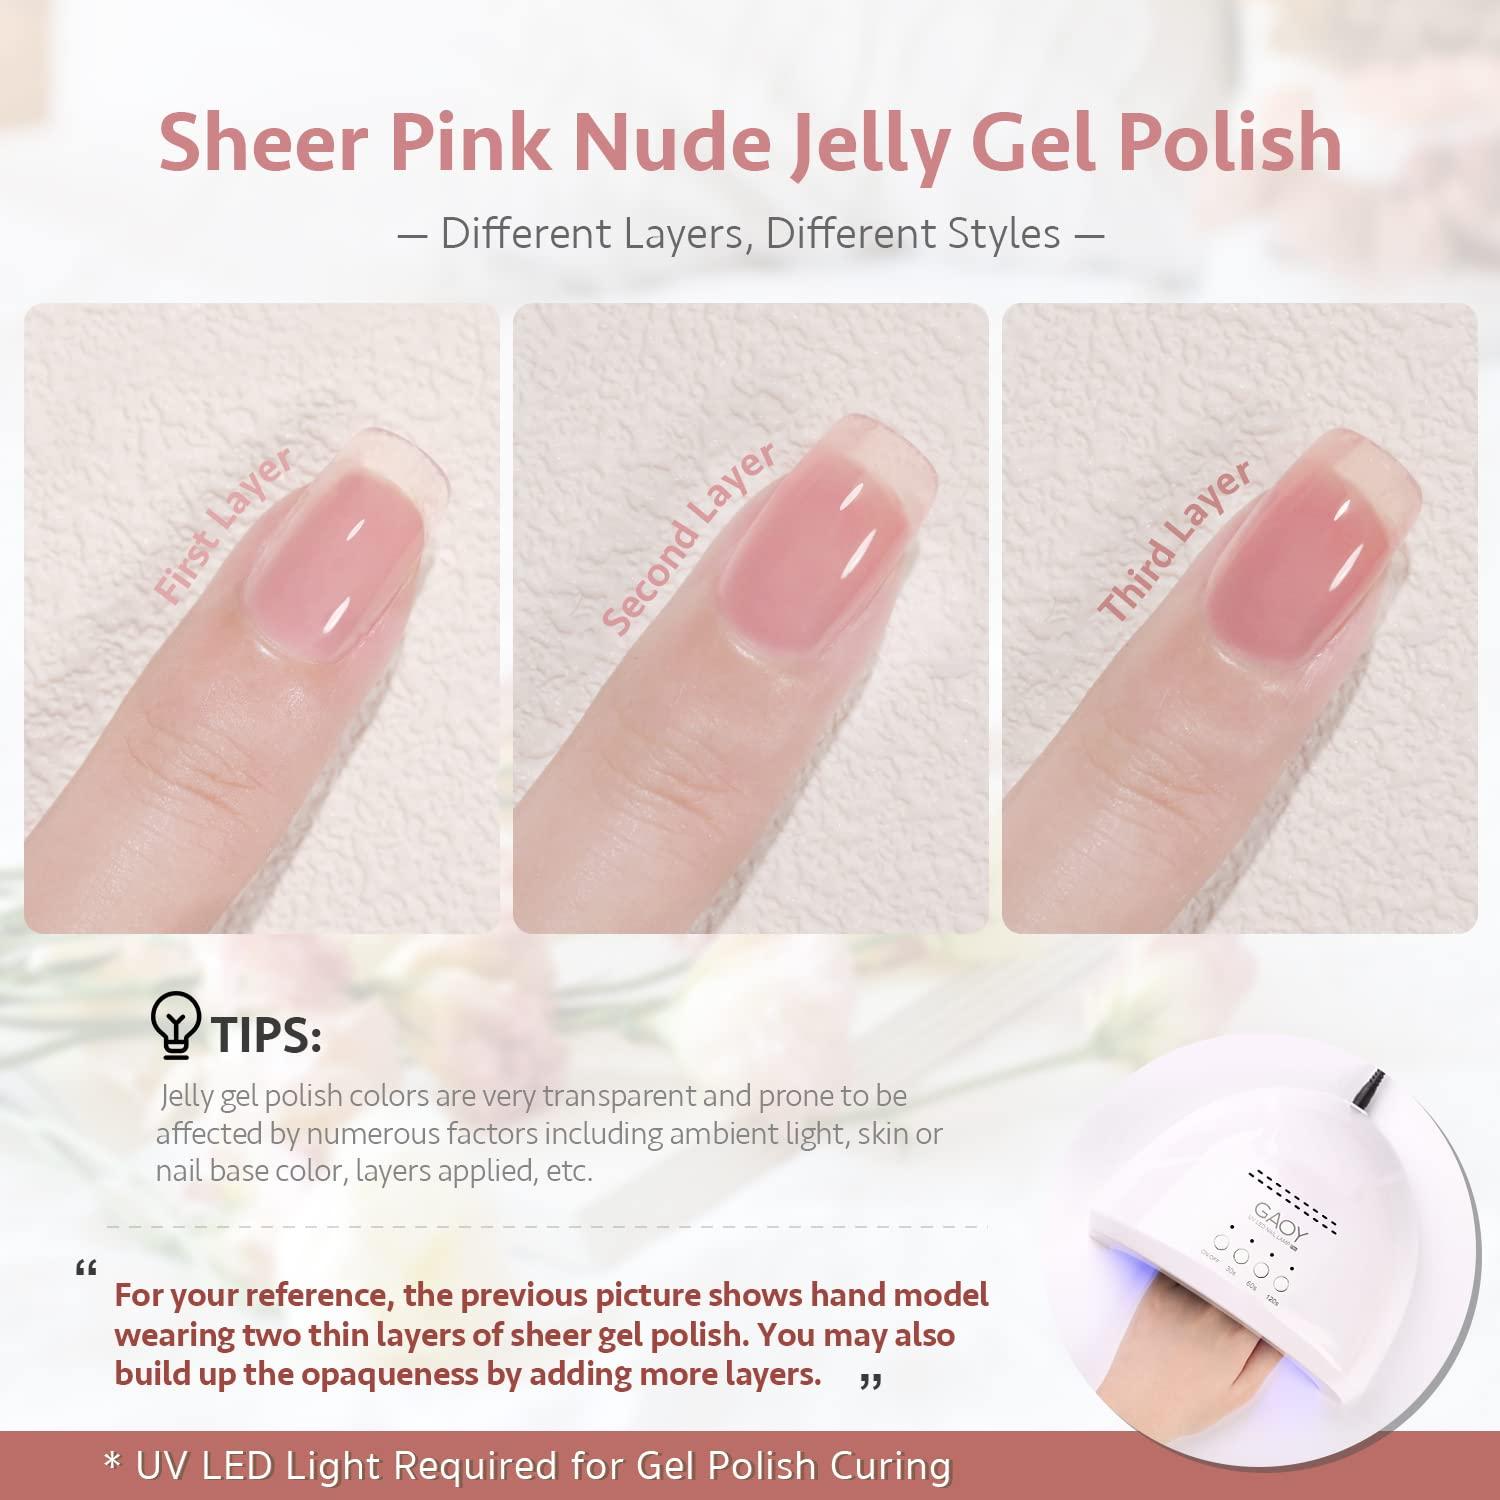 GAOY Jelly Nude Pink Gel Nail Polish Set of 6 Transparent Colors